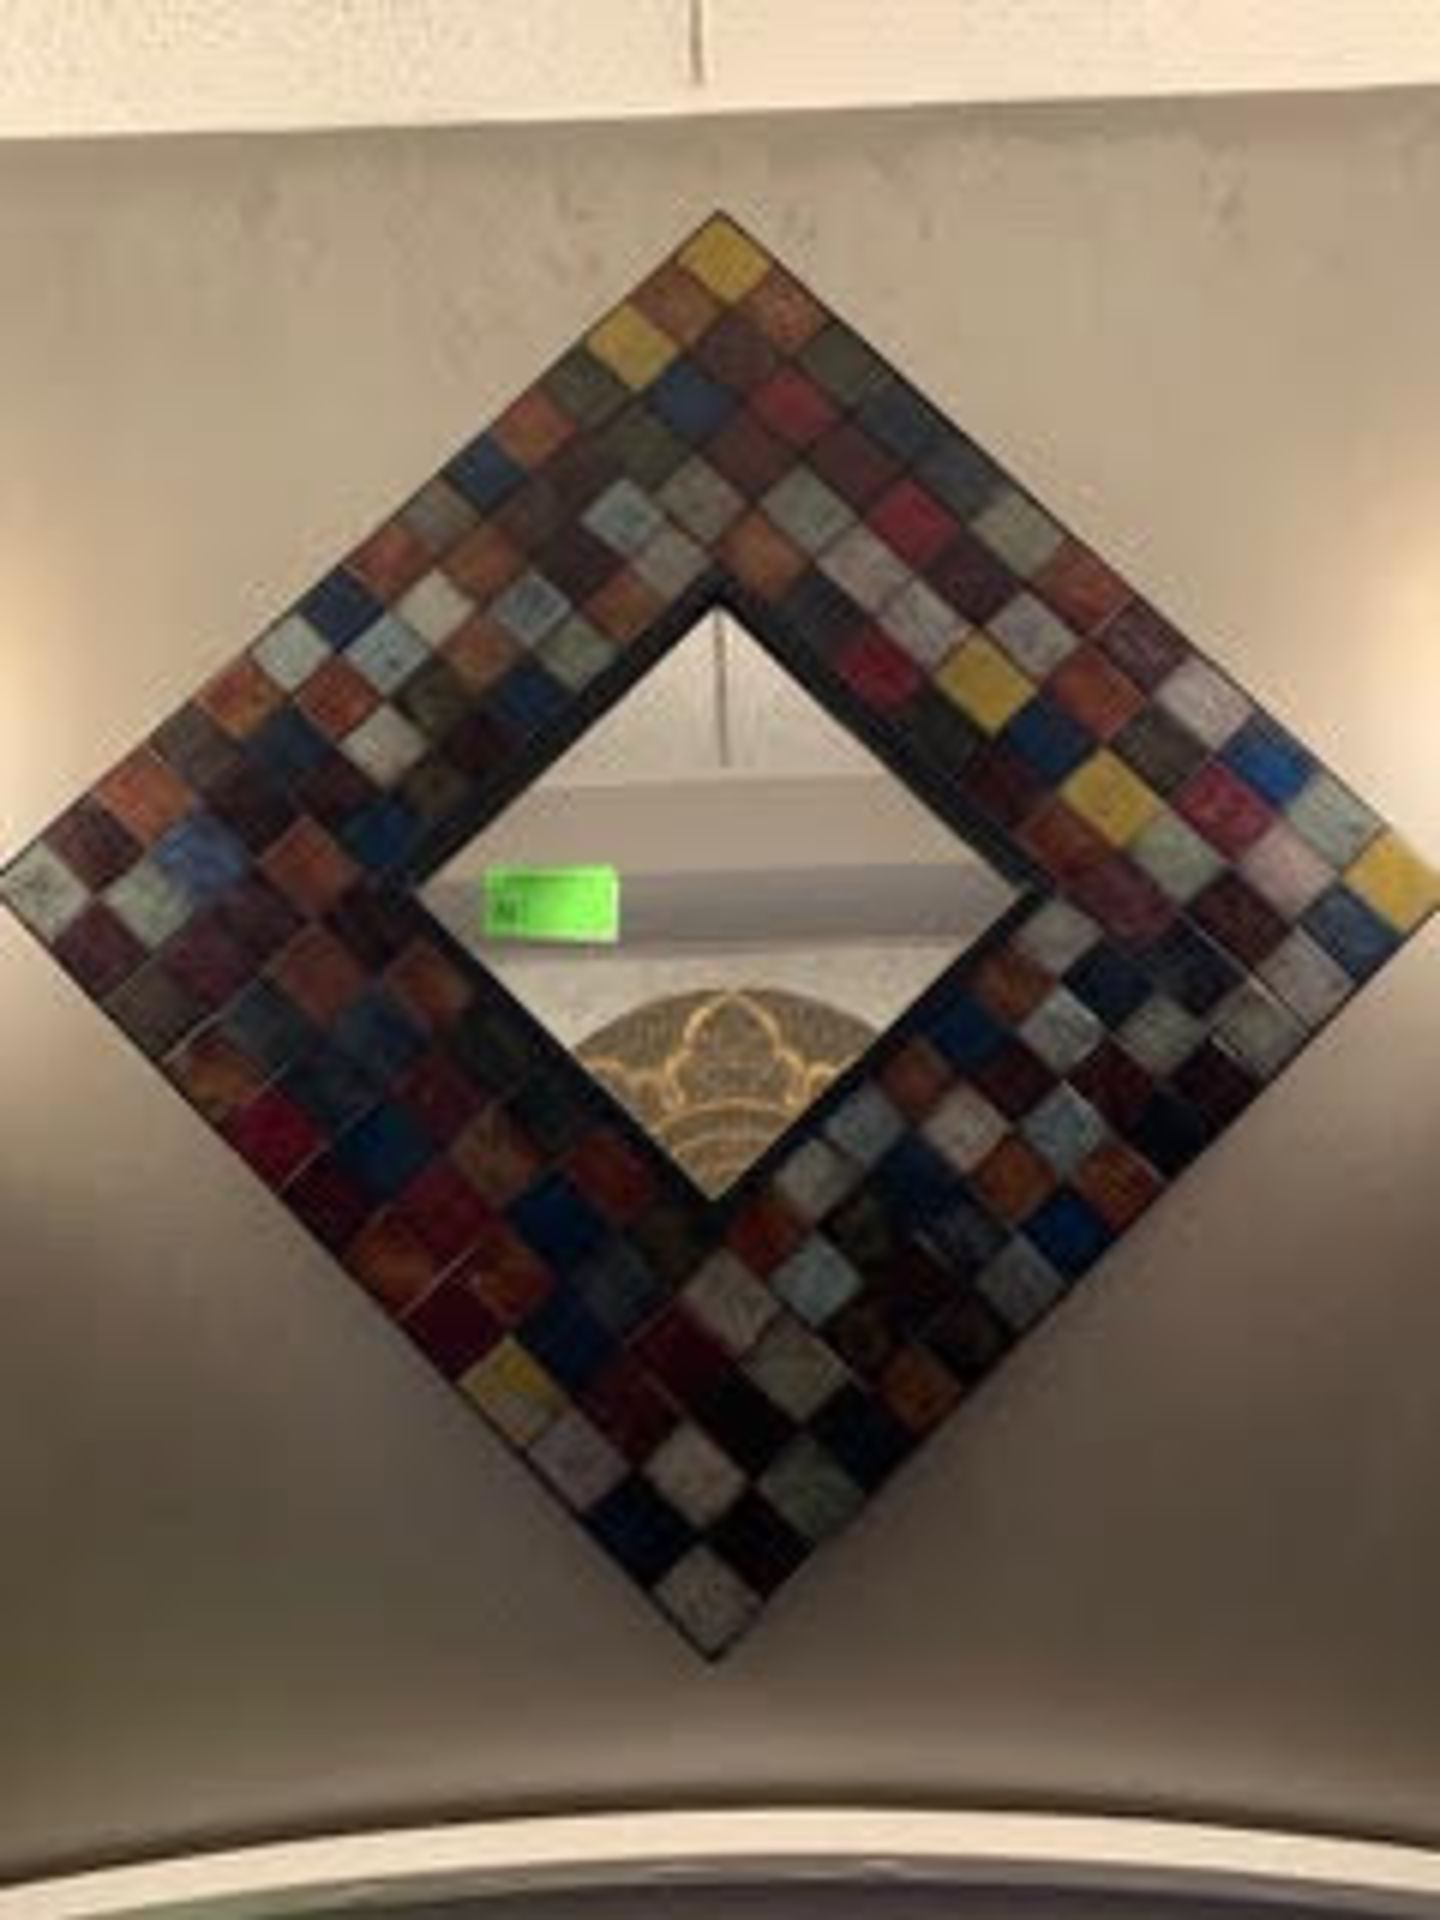 Square wall mirror with multi-colored tiles 30.5” x 30.5”